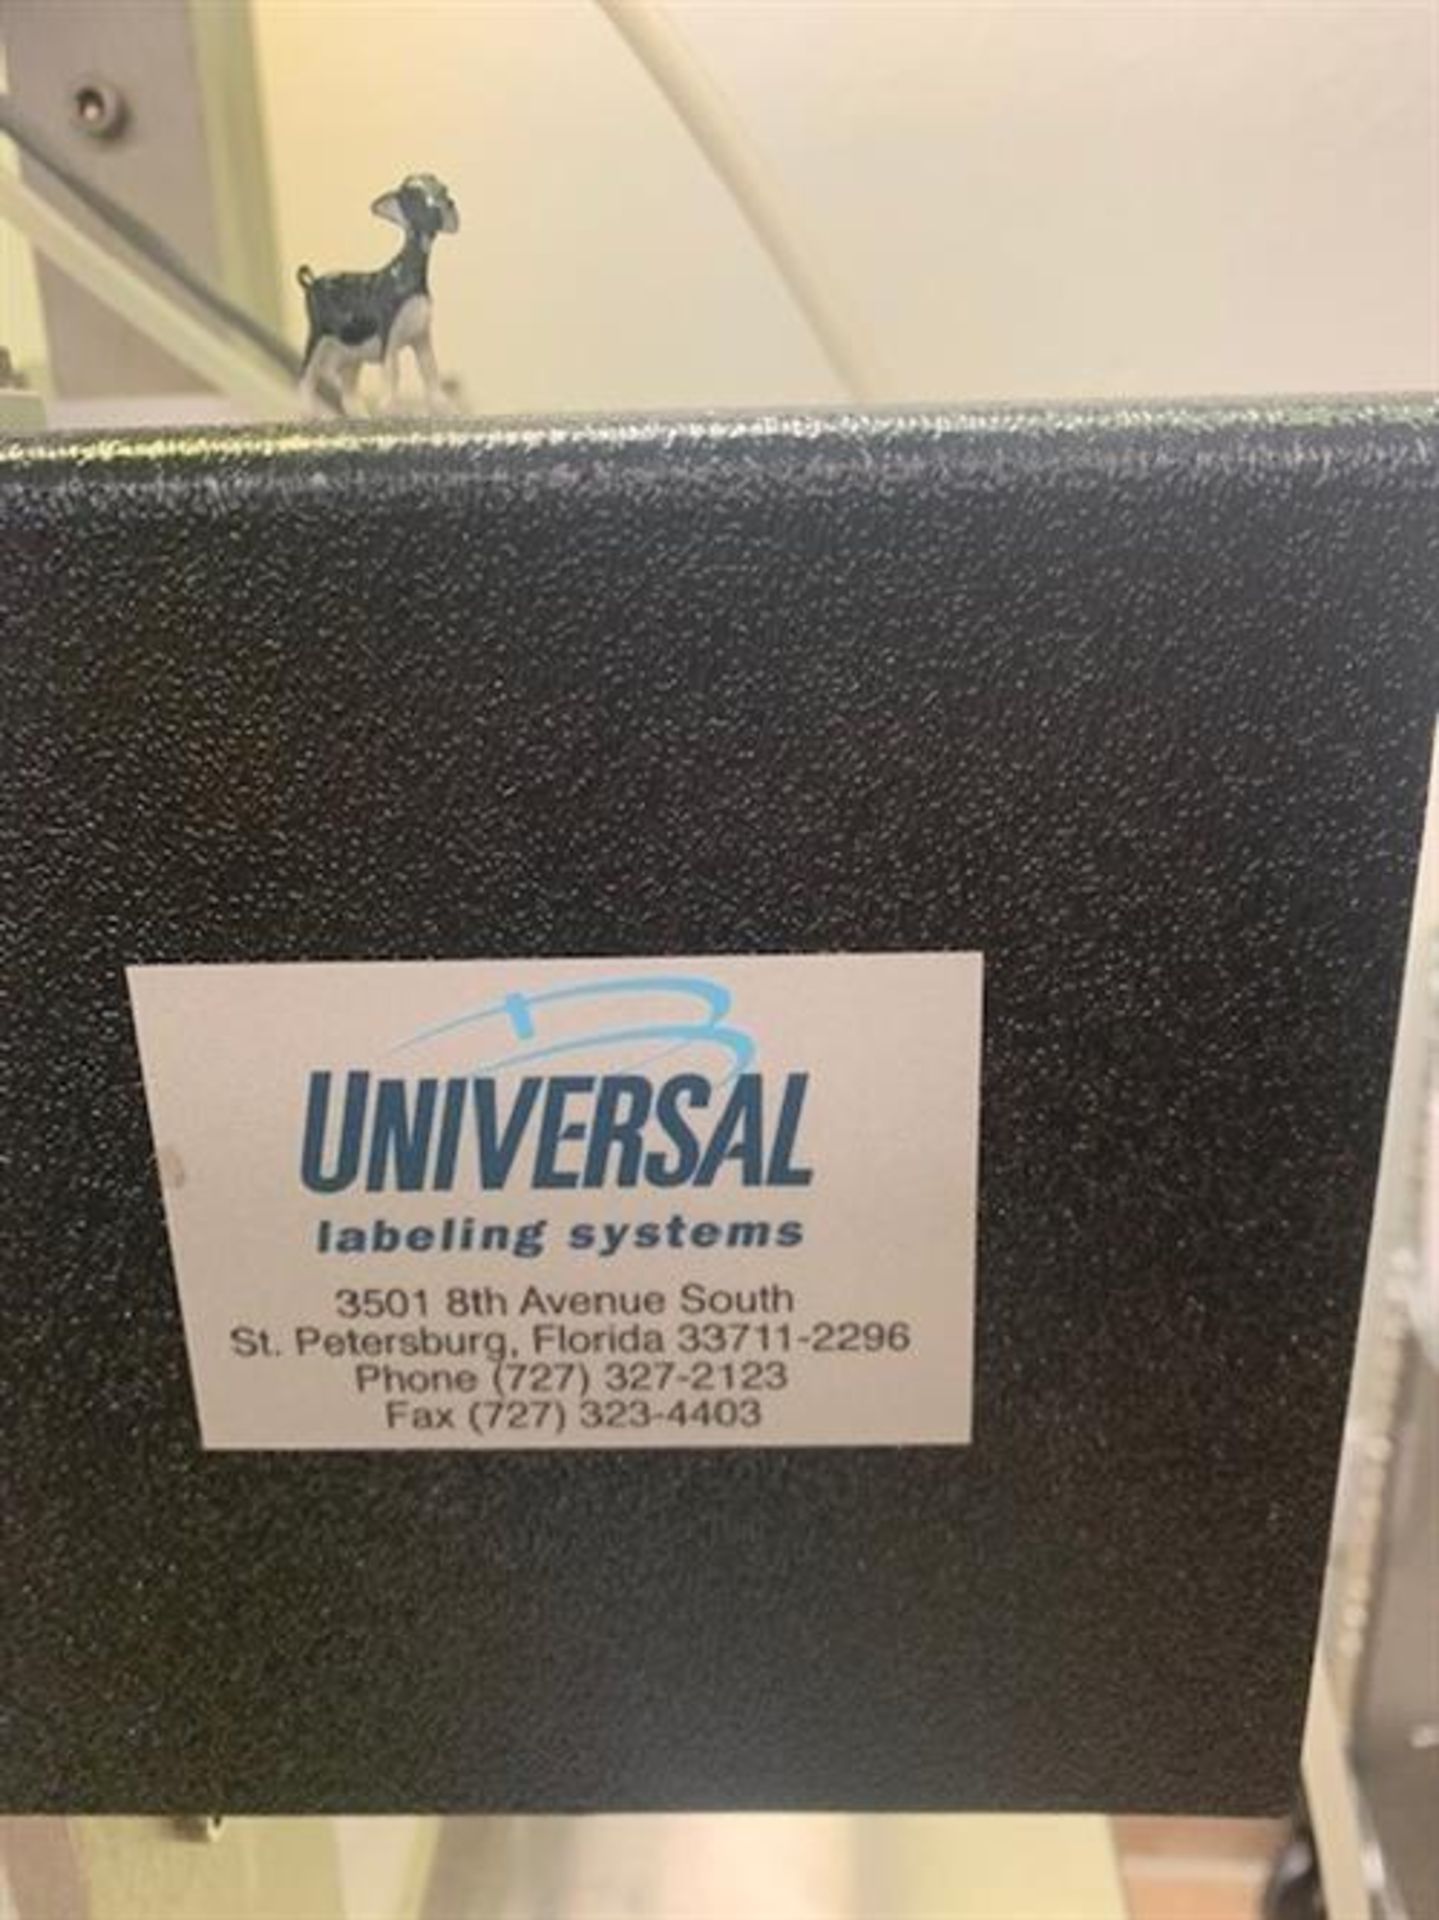 Universal model R310 Table Top Labeler for round containers - Adjustable product holding carriage . - Image 2 of 3